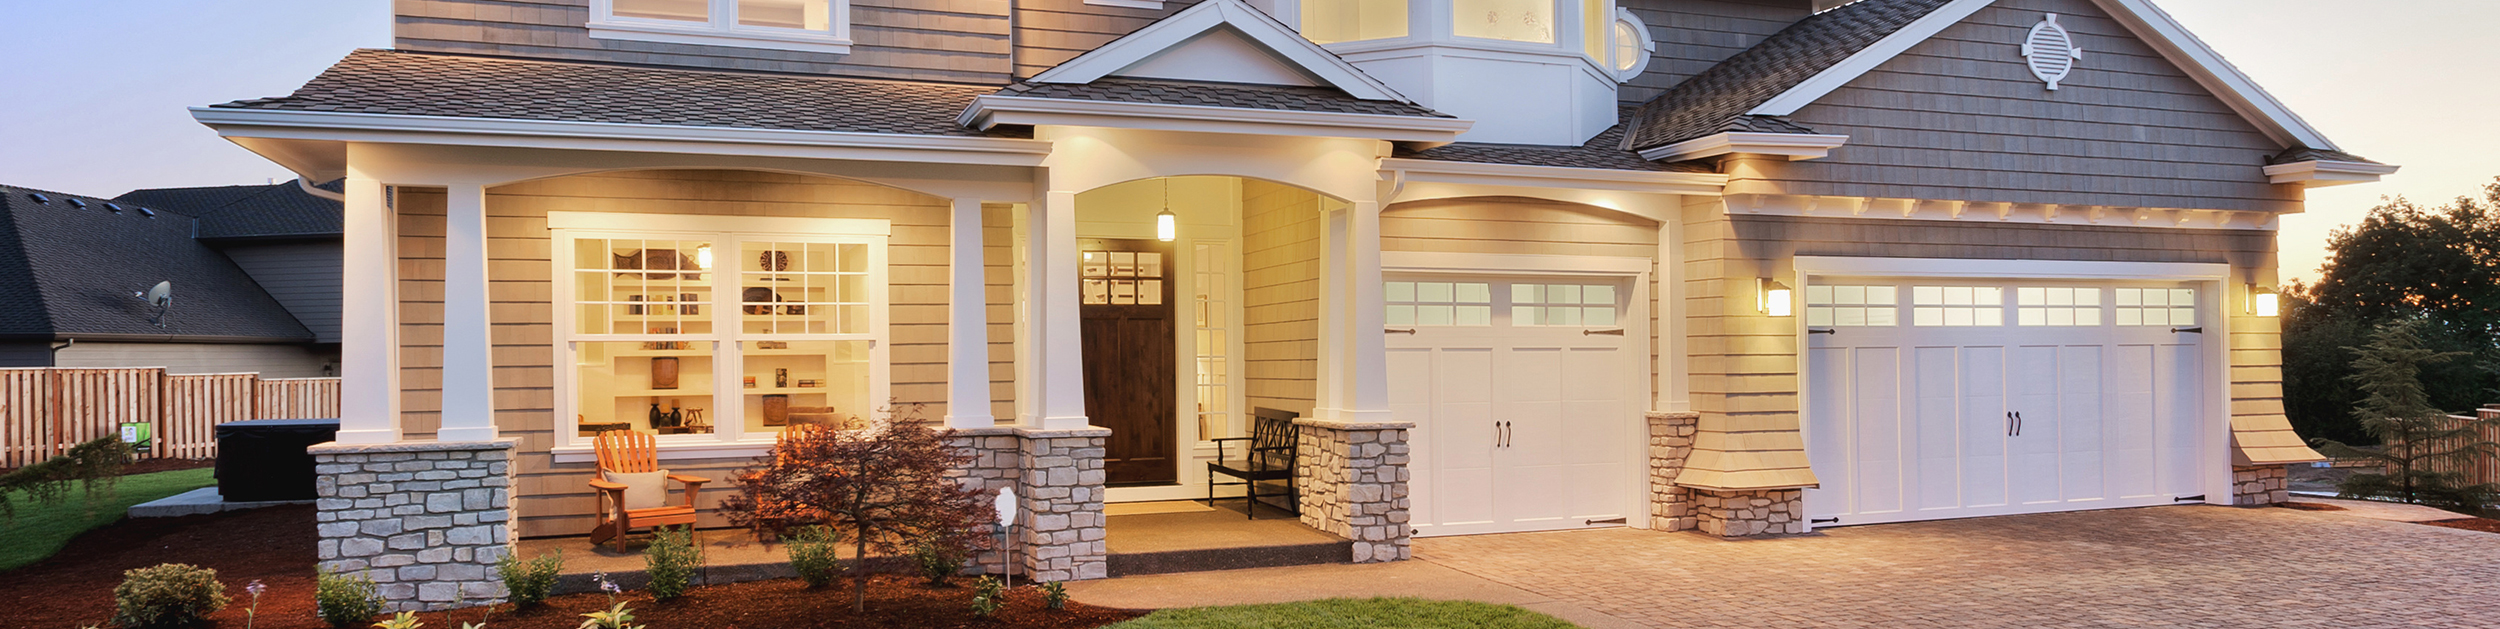 exterior of beautifully lit up home with a stone driveway - gray shingles with white trim and garage doors, stonework and pillars supporting the overhang with two adirondack chairs and a bench on the front porch